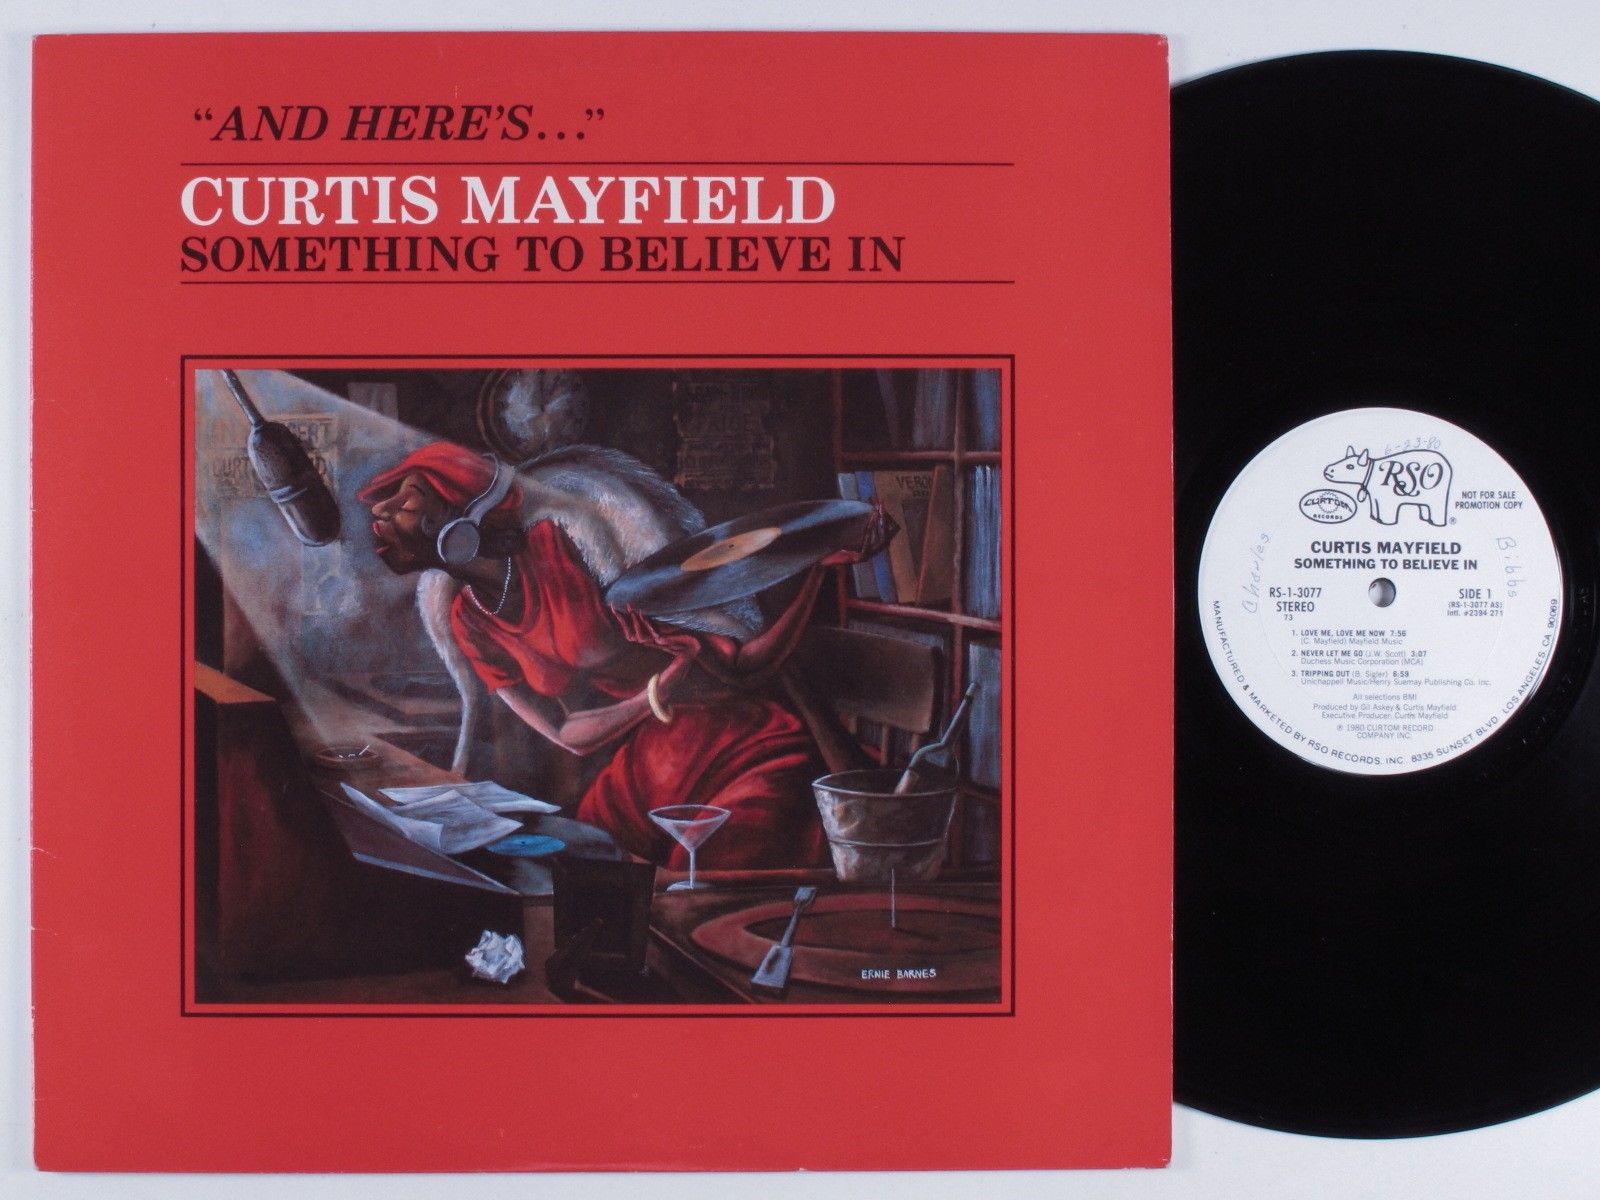 popsike.com - CURTIS MAYFIELD Something To Believe In RSO LP